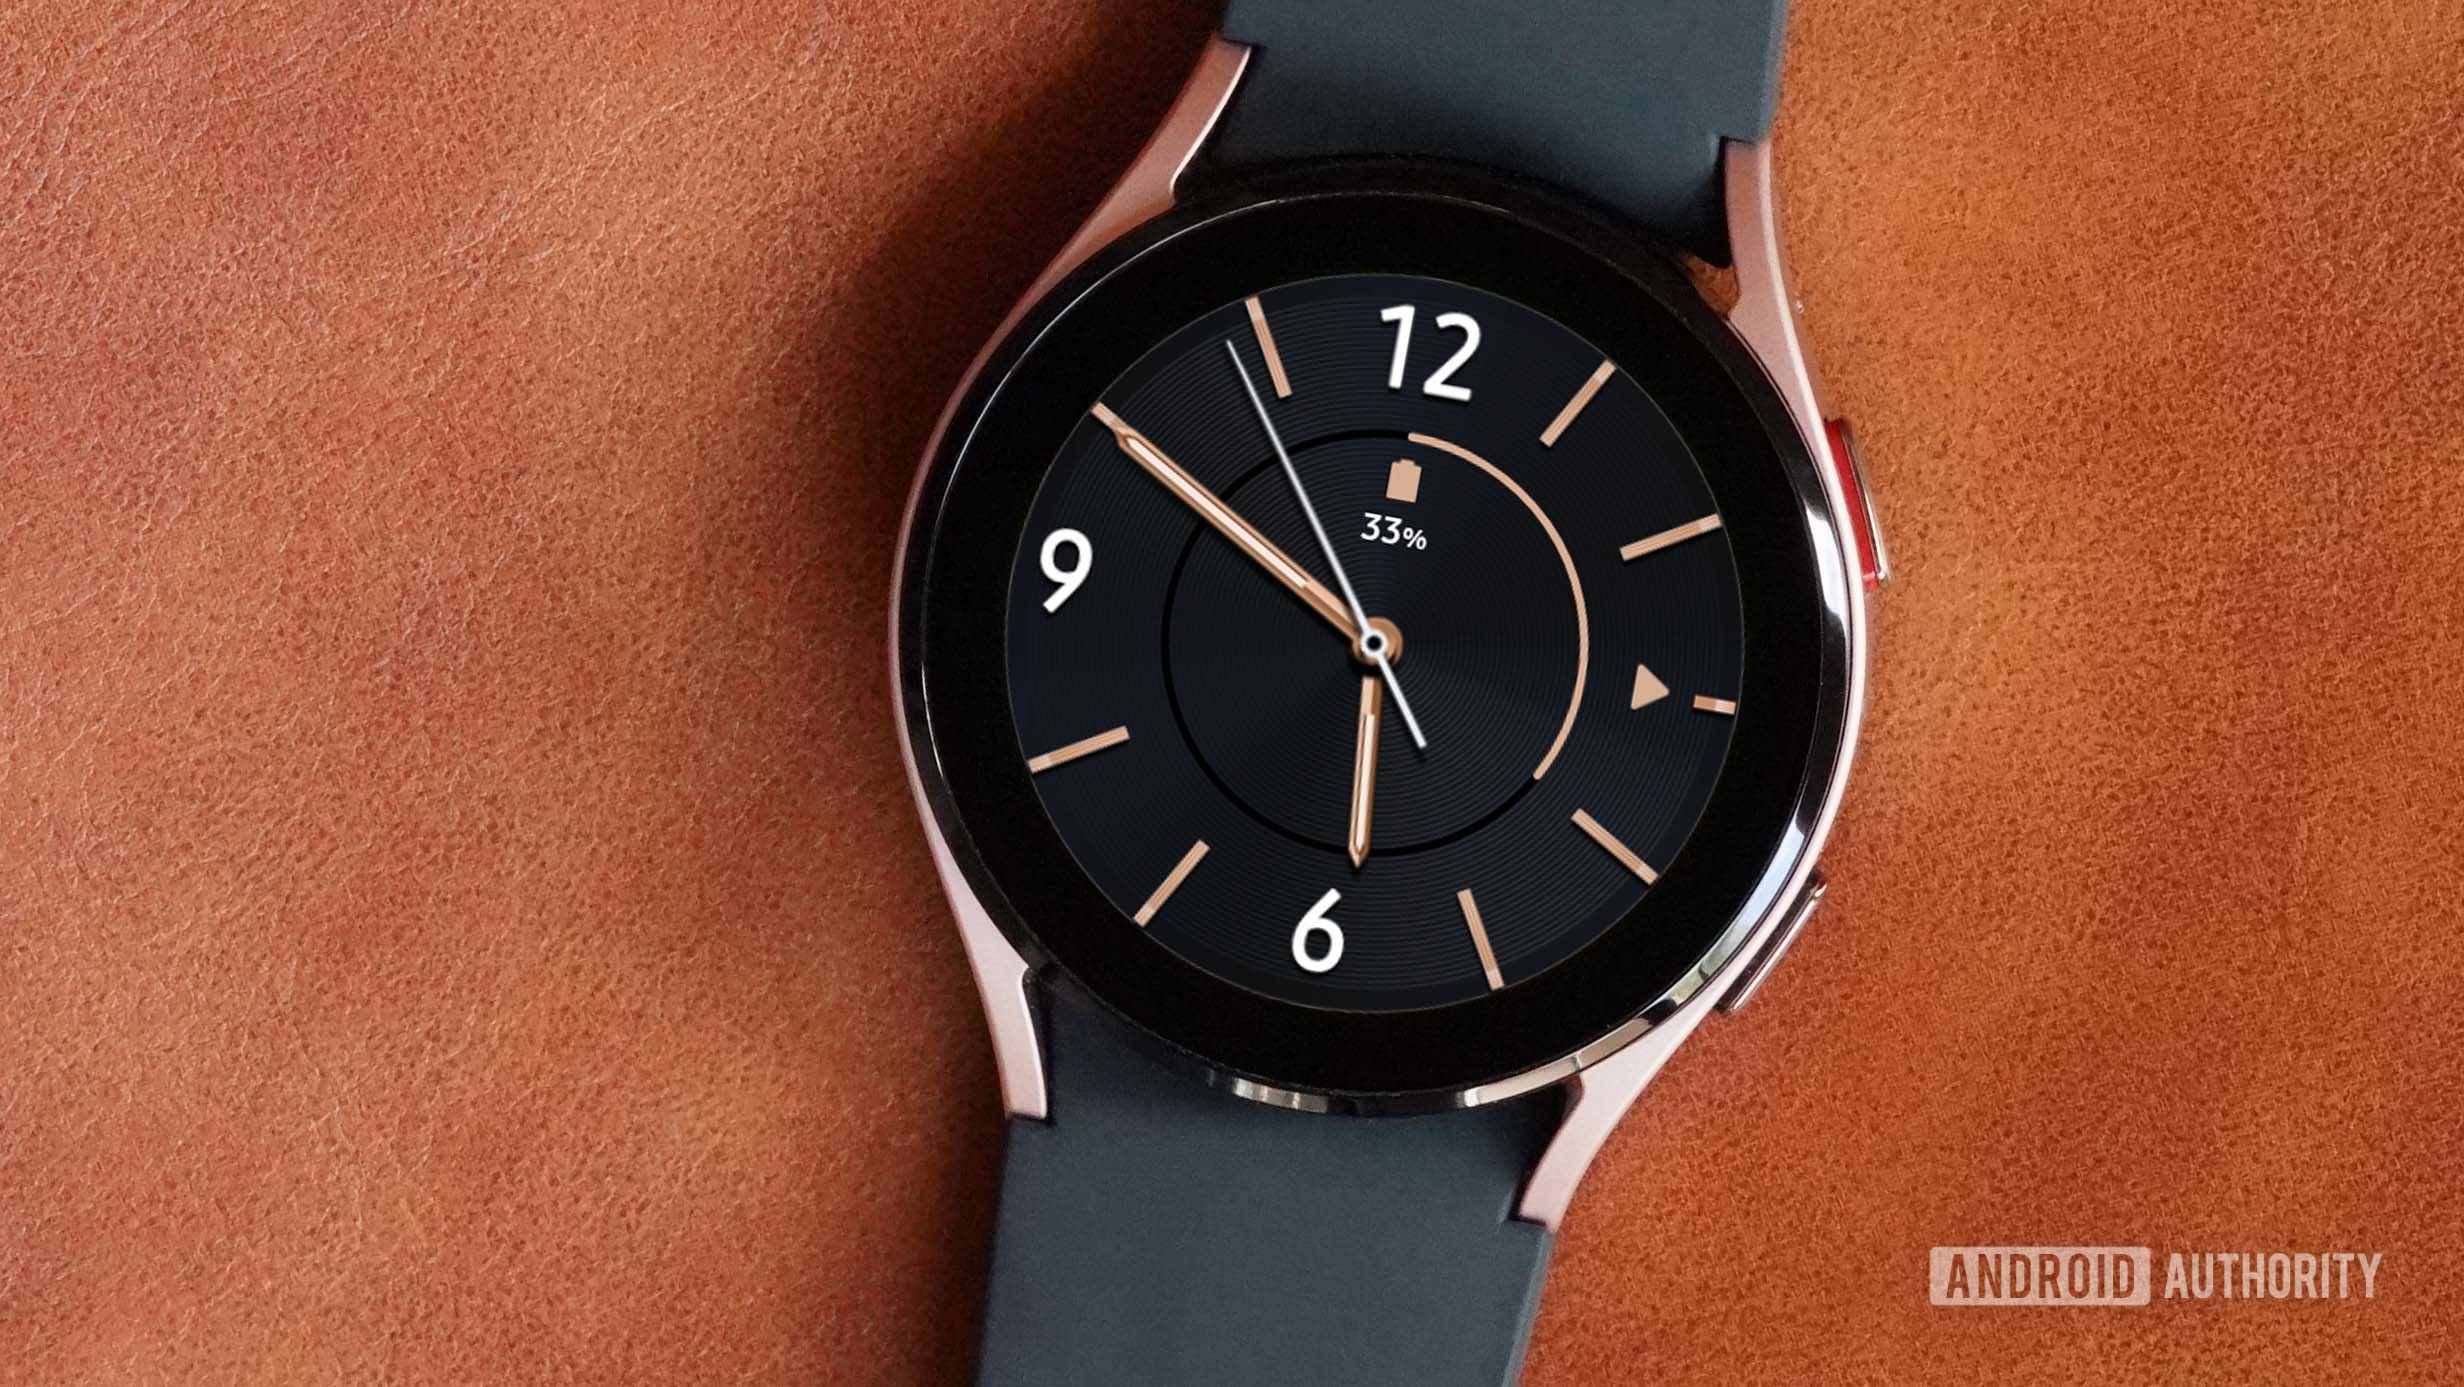 A Samsung Galaxy Watch 4 on a leather surface displays the watch face Modern Minimalist.